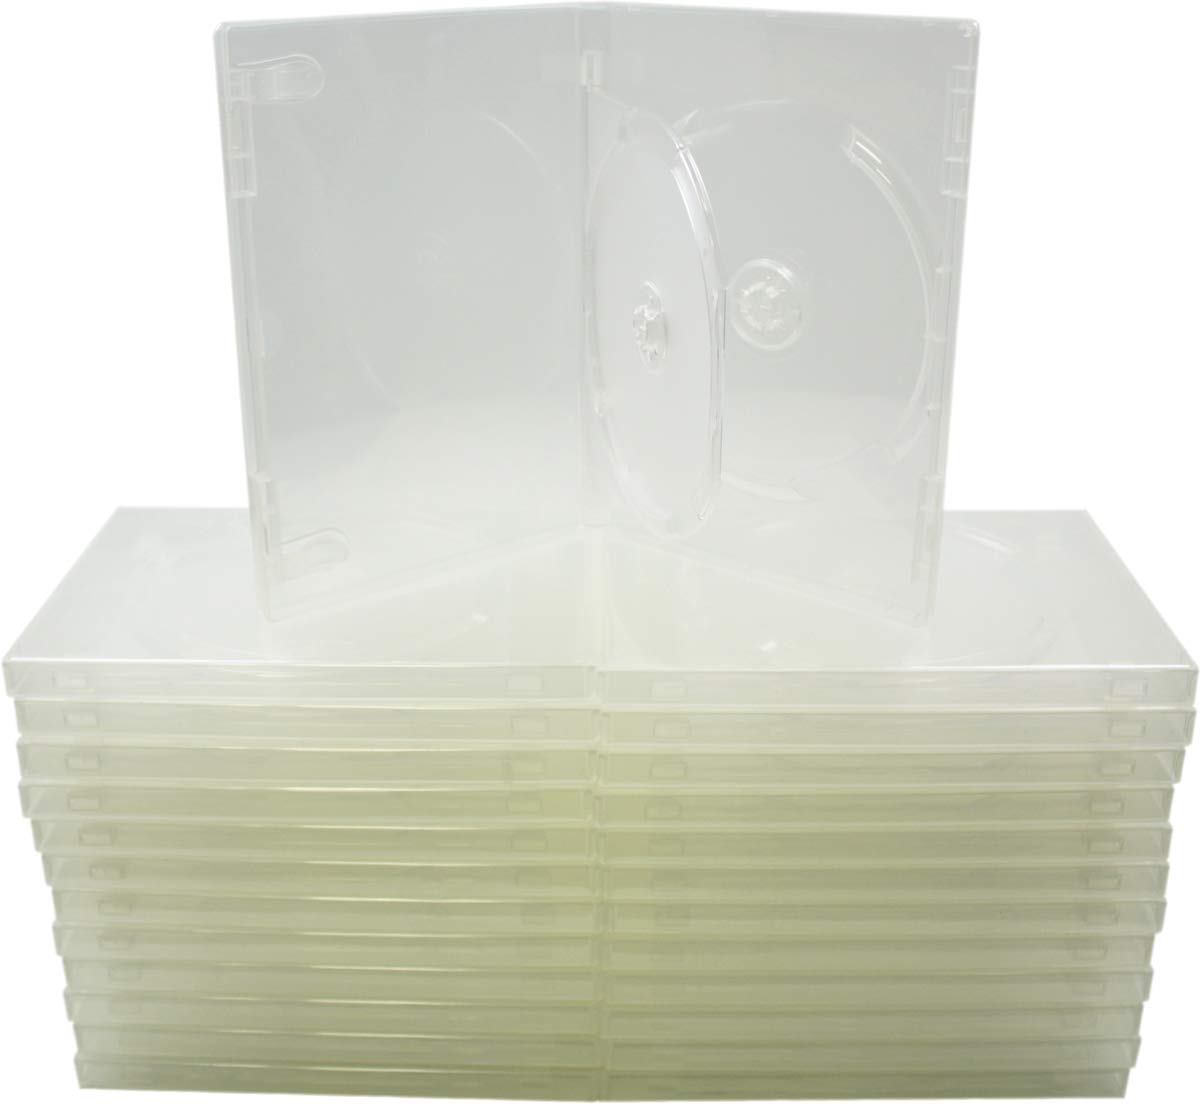 Square Deal Online - DV2R14CLWT - DVD Cases - 2 Disc - 14mm - with Hinged Tray and Wrap Around Sleeve - Clear (25-Pack)